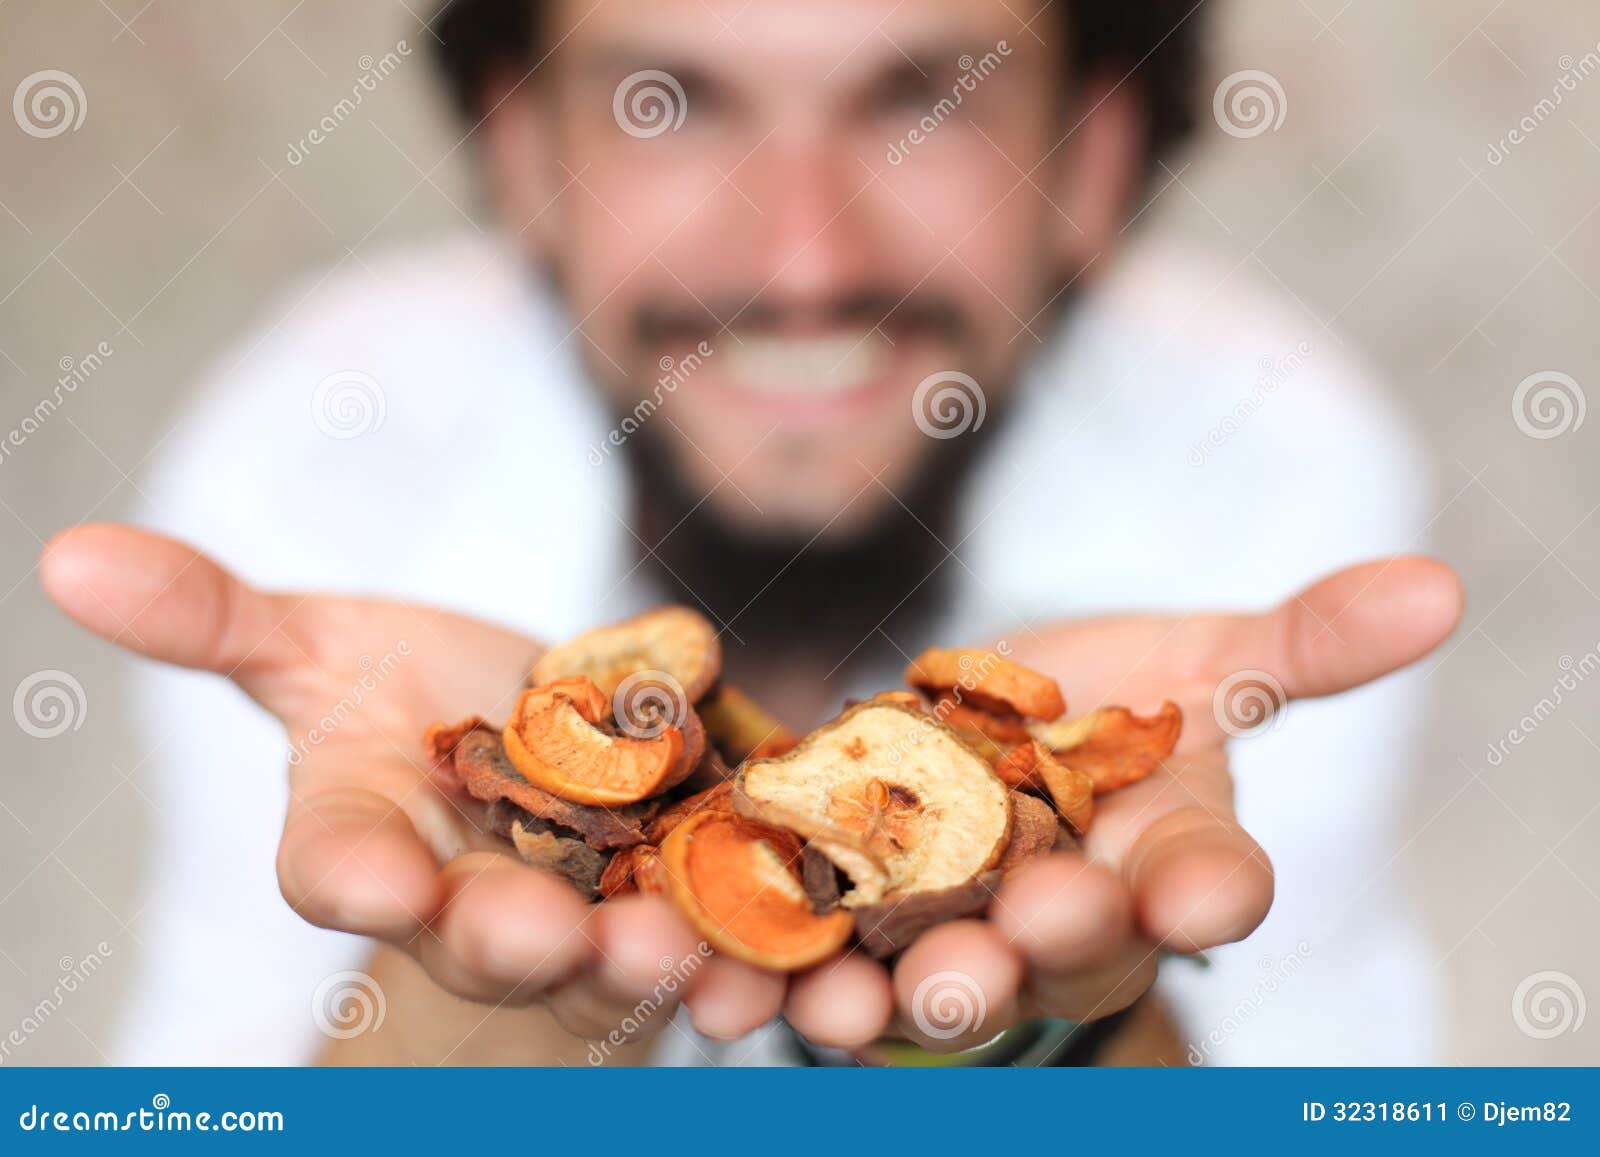 Hands with dried fruits - hands-dried-fruits-man-s-32318611